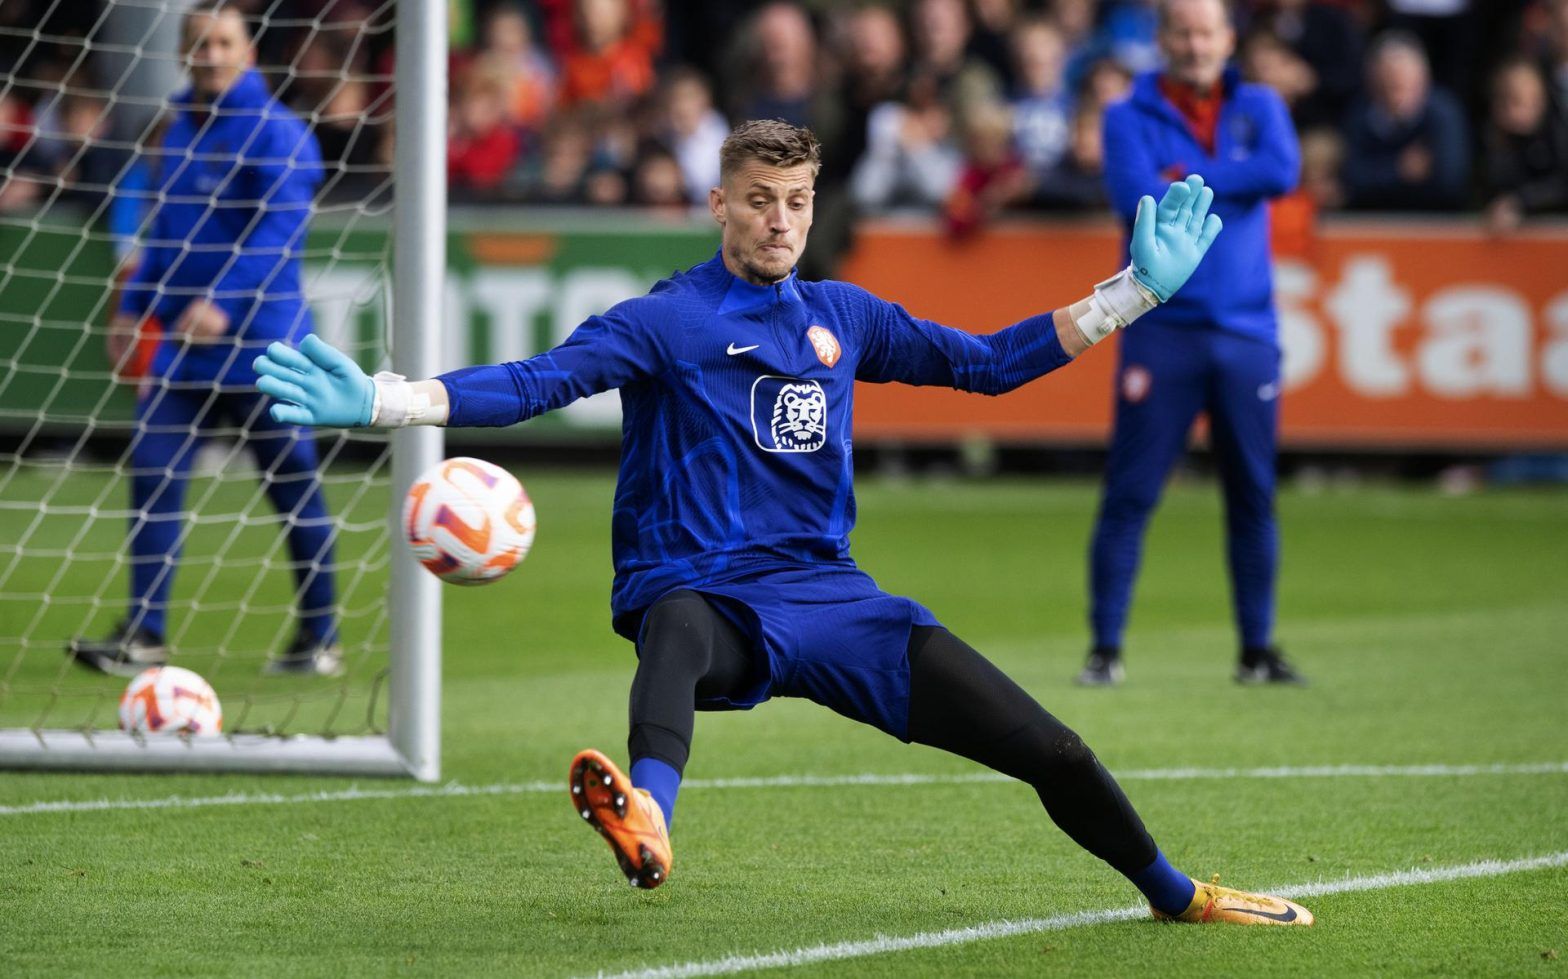 Incredible but true: Andries Noppert from Joure will be the first  goalkeeper of the Orange at the World Cup in Qatar